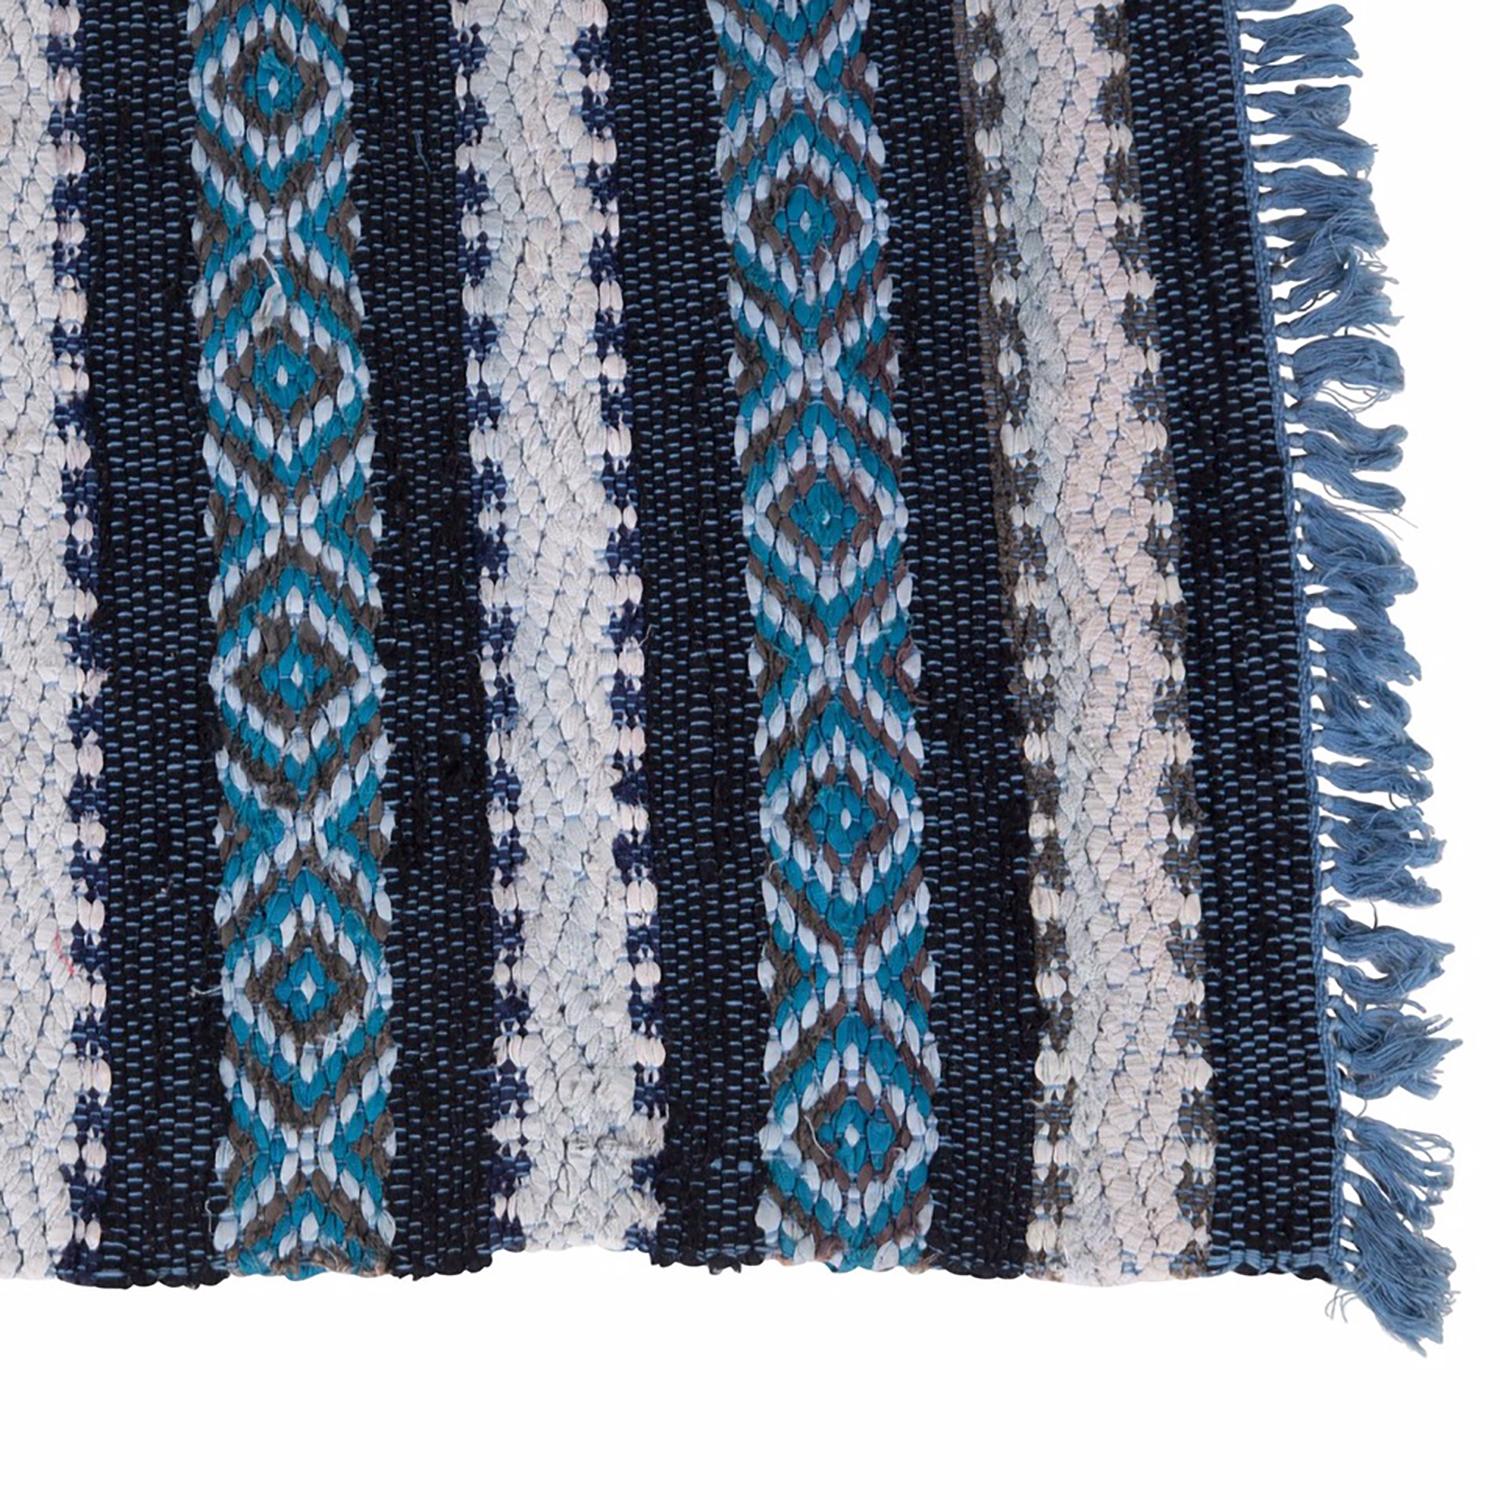 Hand-Woven 20th Century Diamond Patterned Blue White and Black Swedish Handwoven Cotton Rug